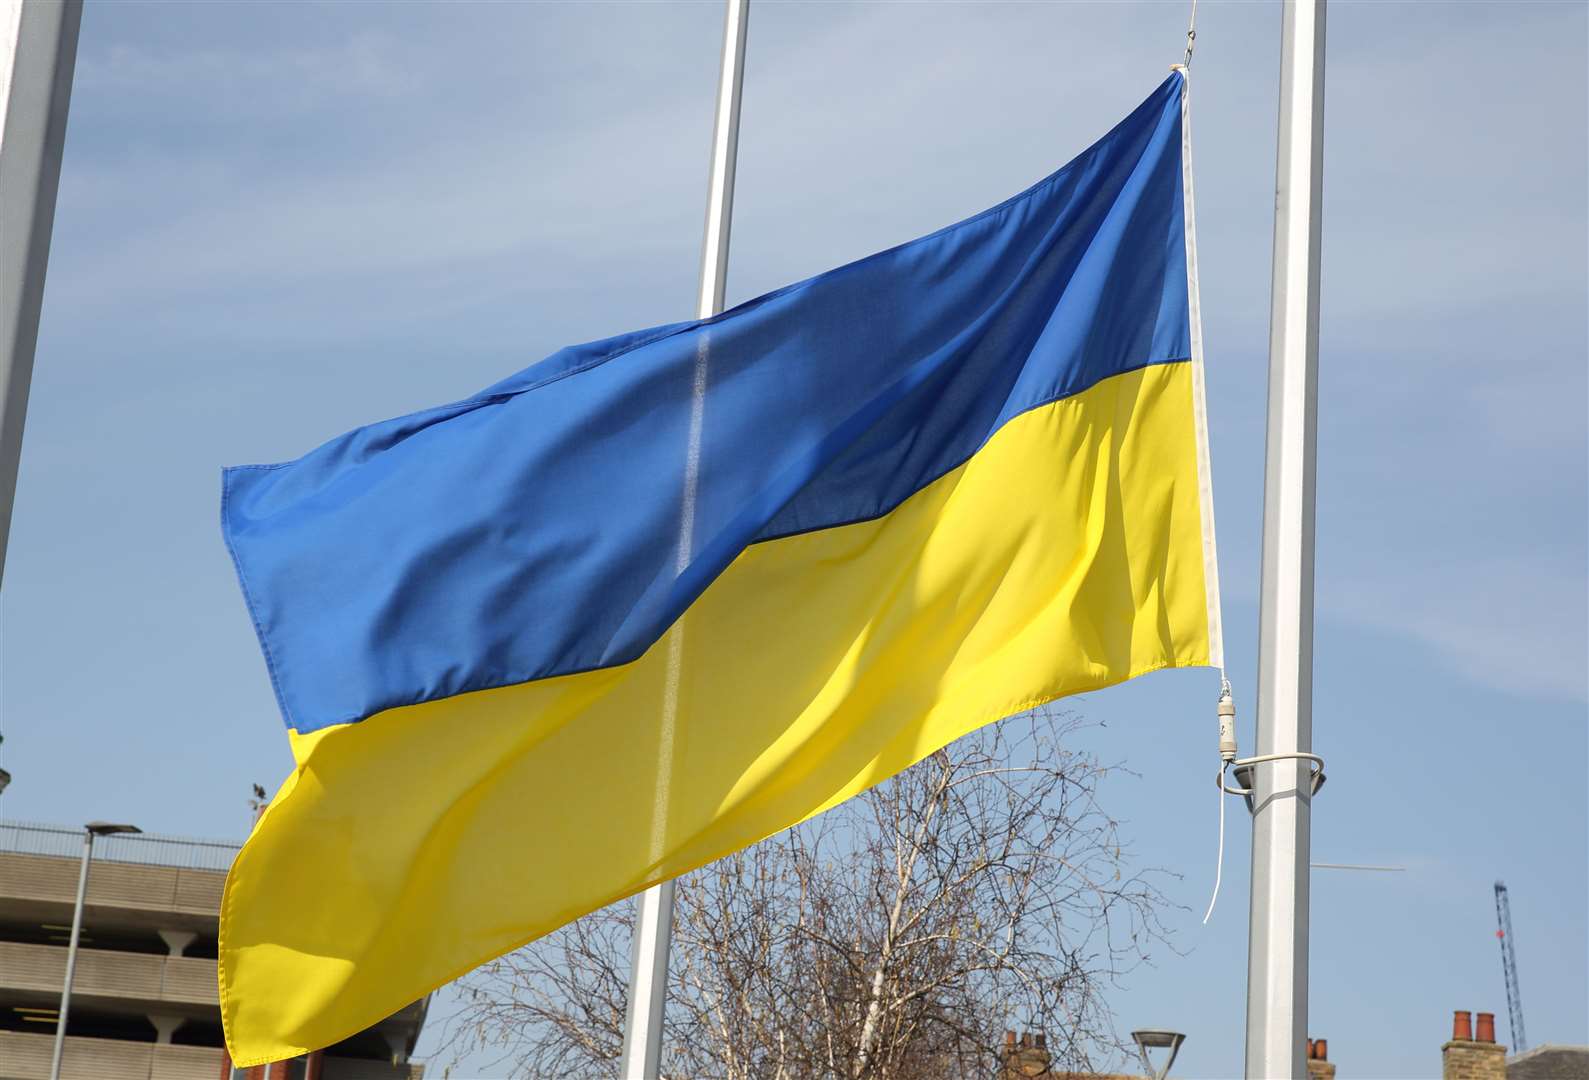 The Ukraine flag flying outside the civic centre in Gravesend to show solidarity with the nation's plight. Picture: Gravesham Borough Council